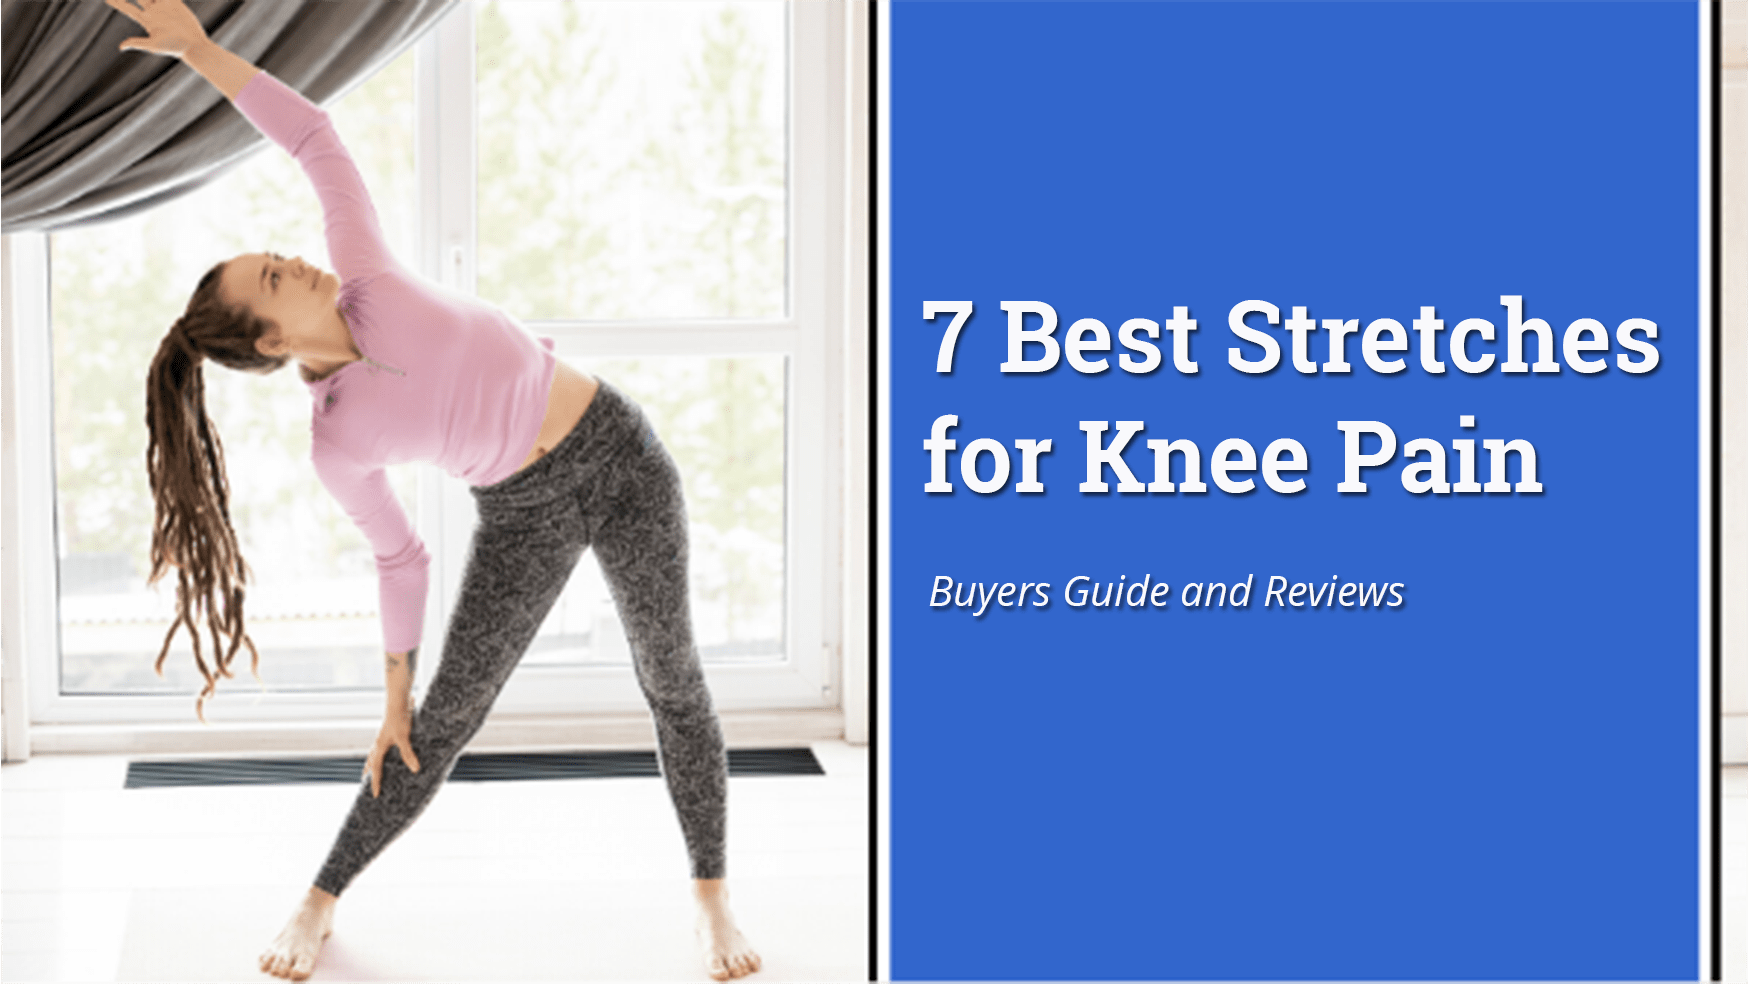 7 Best Stretches for Knee Pain